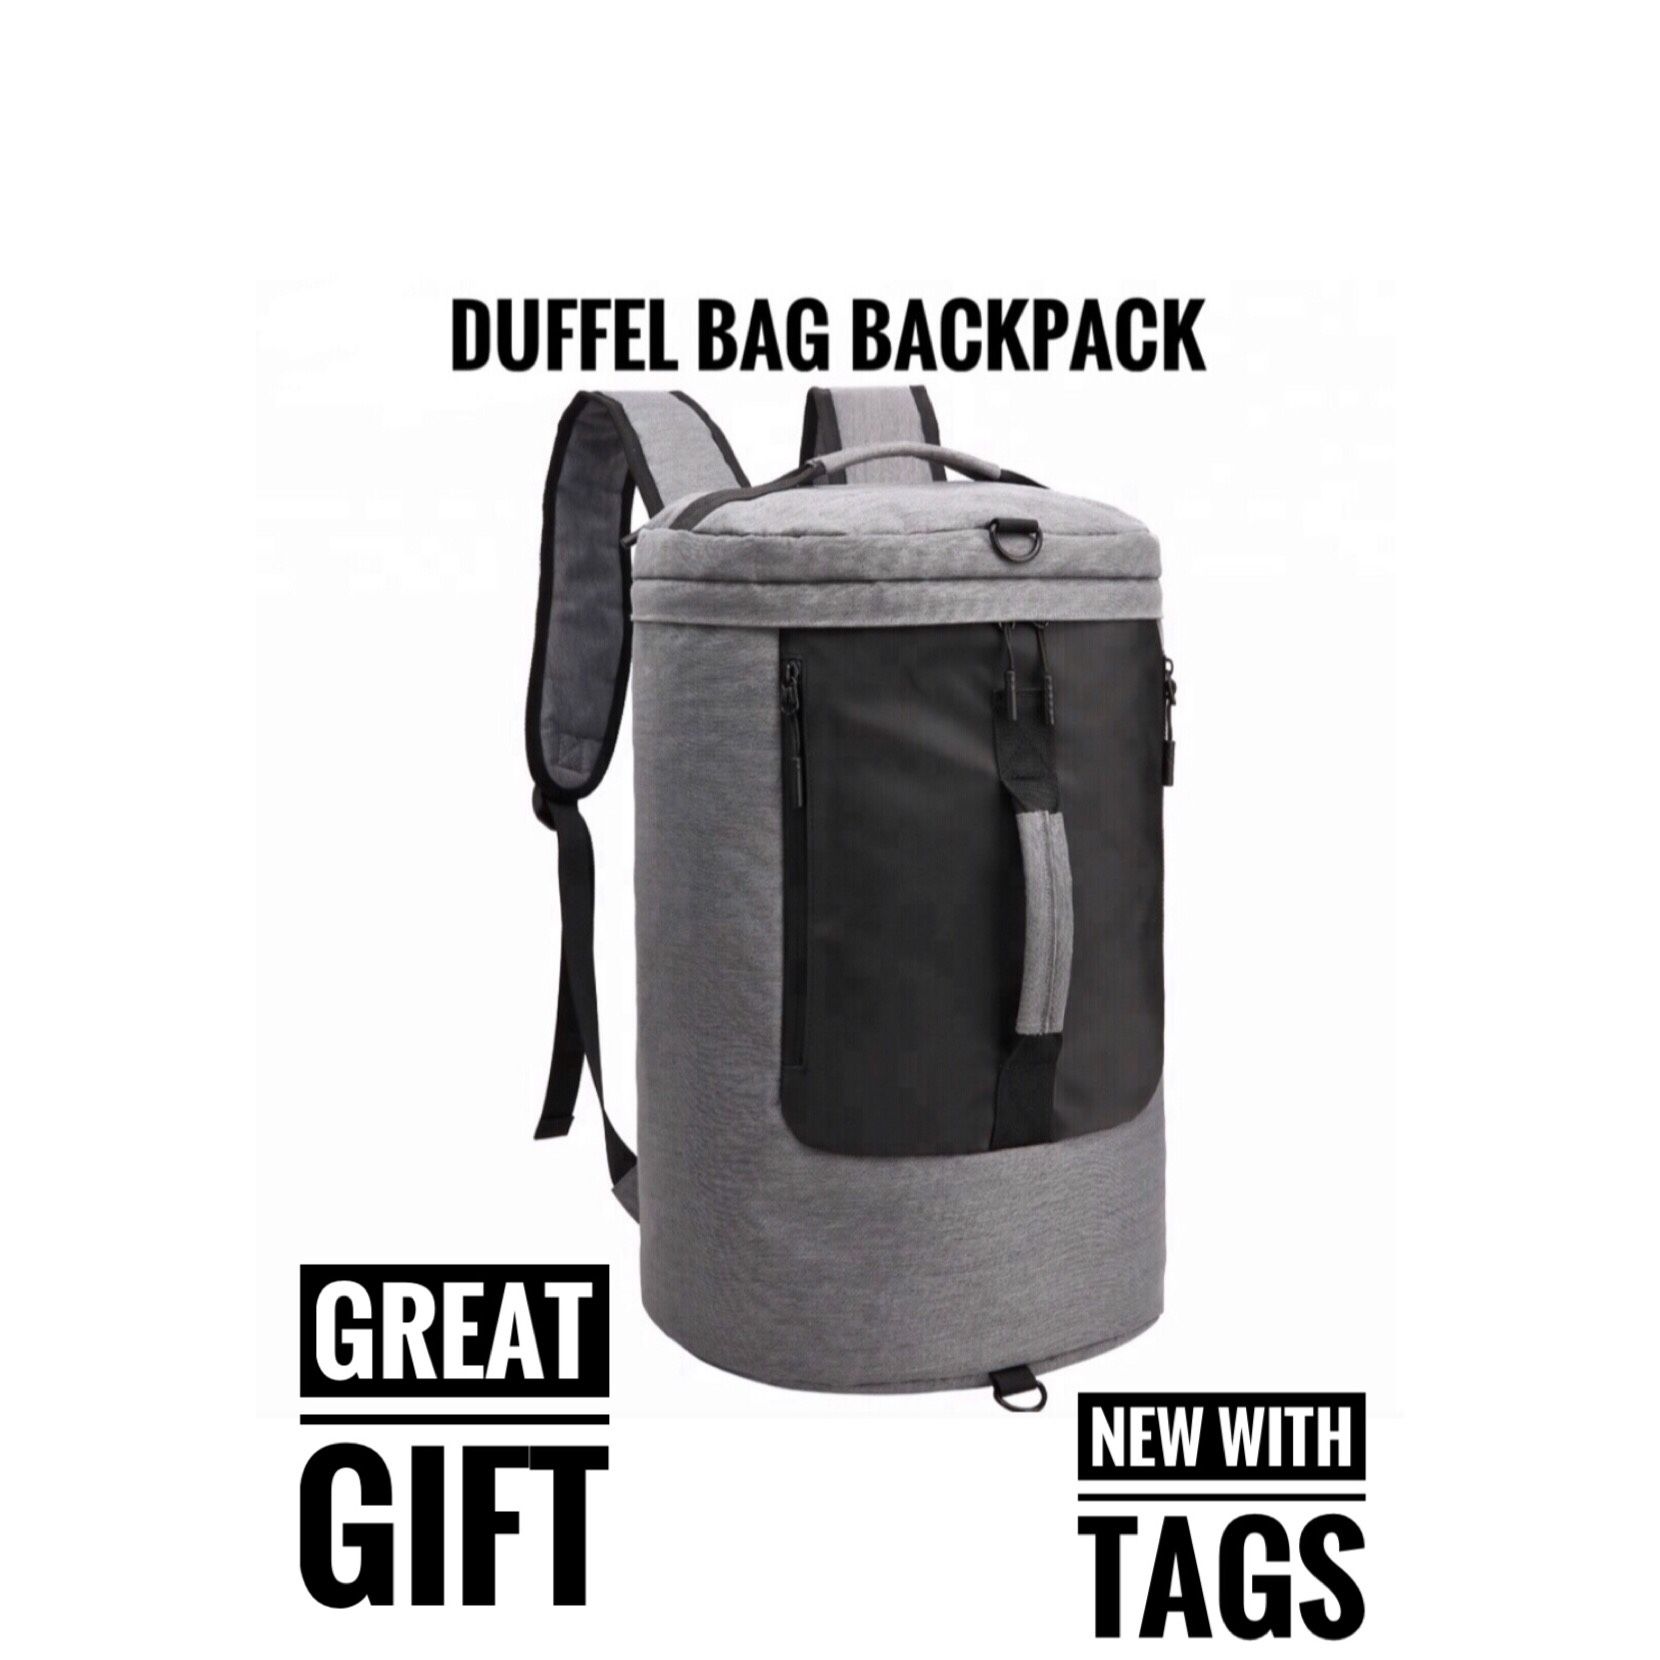 ▪️Duffel Bag / backpack/ travel bag / gym bag • new with tags • fast shipping • best seller